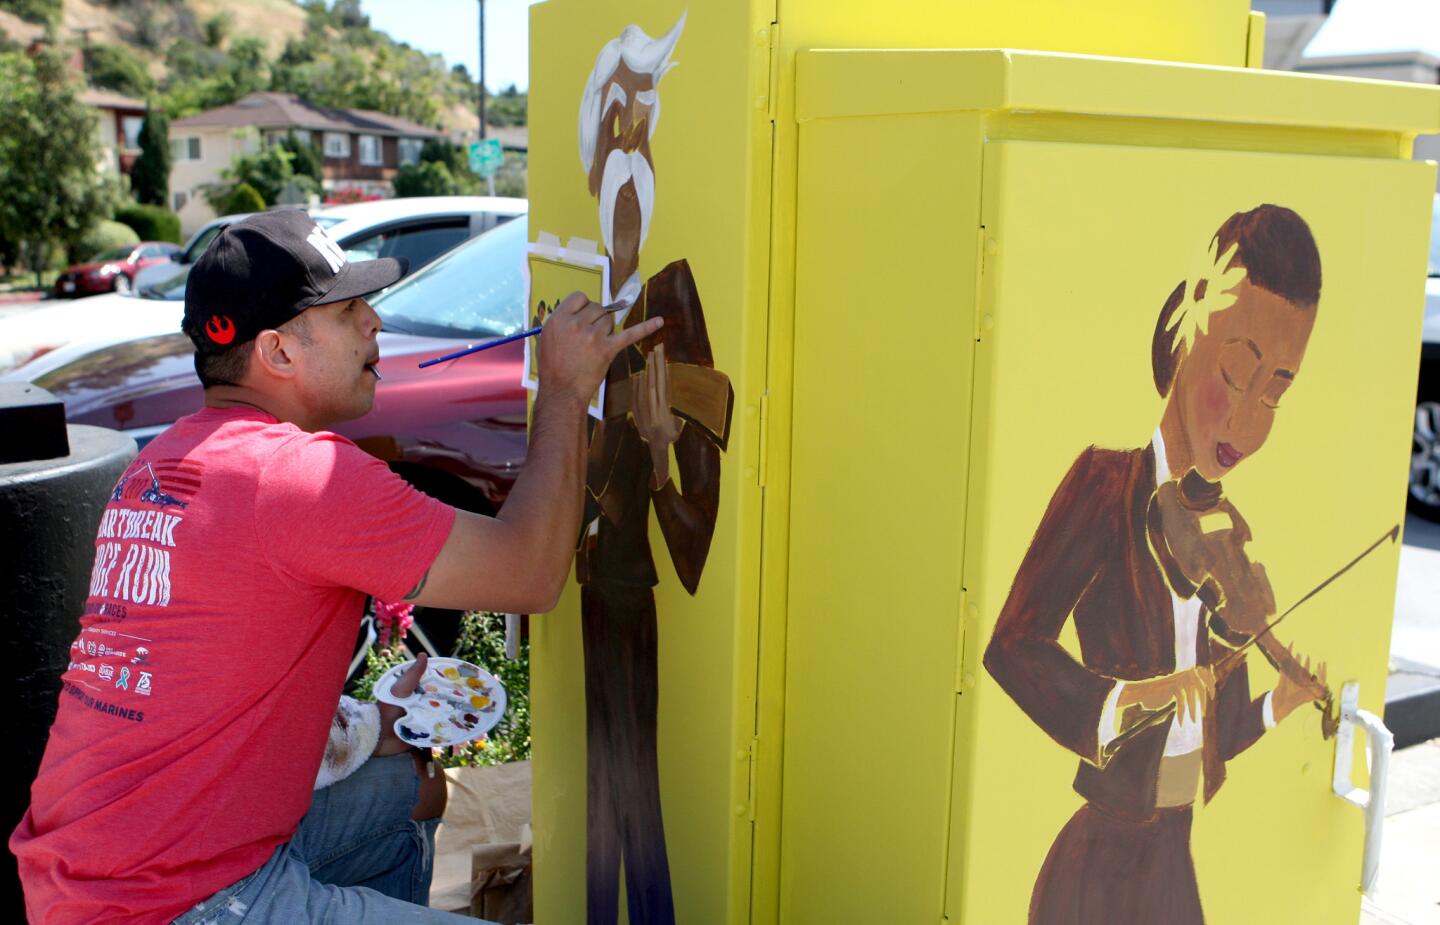 Photo Gallery: Additional area utility boxes decorated by local artists